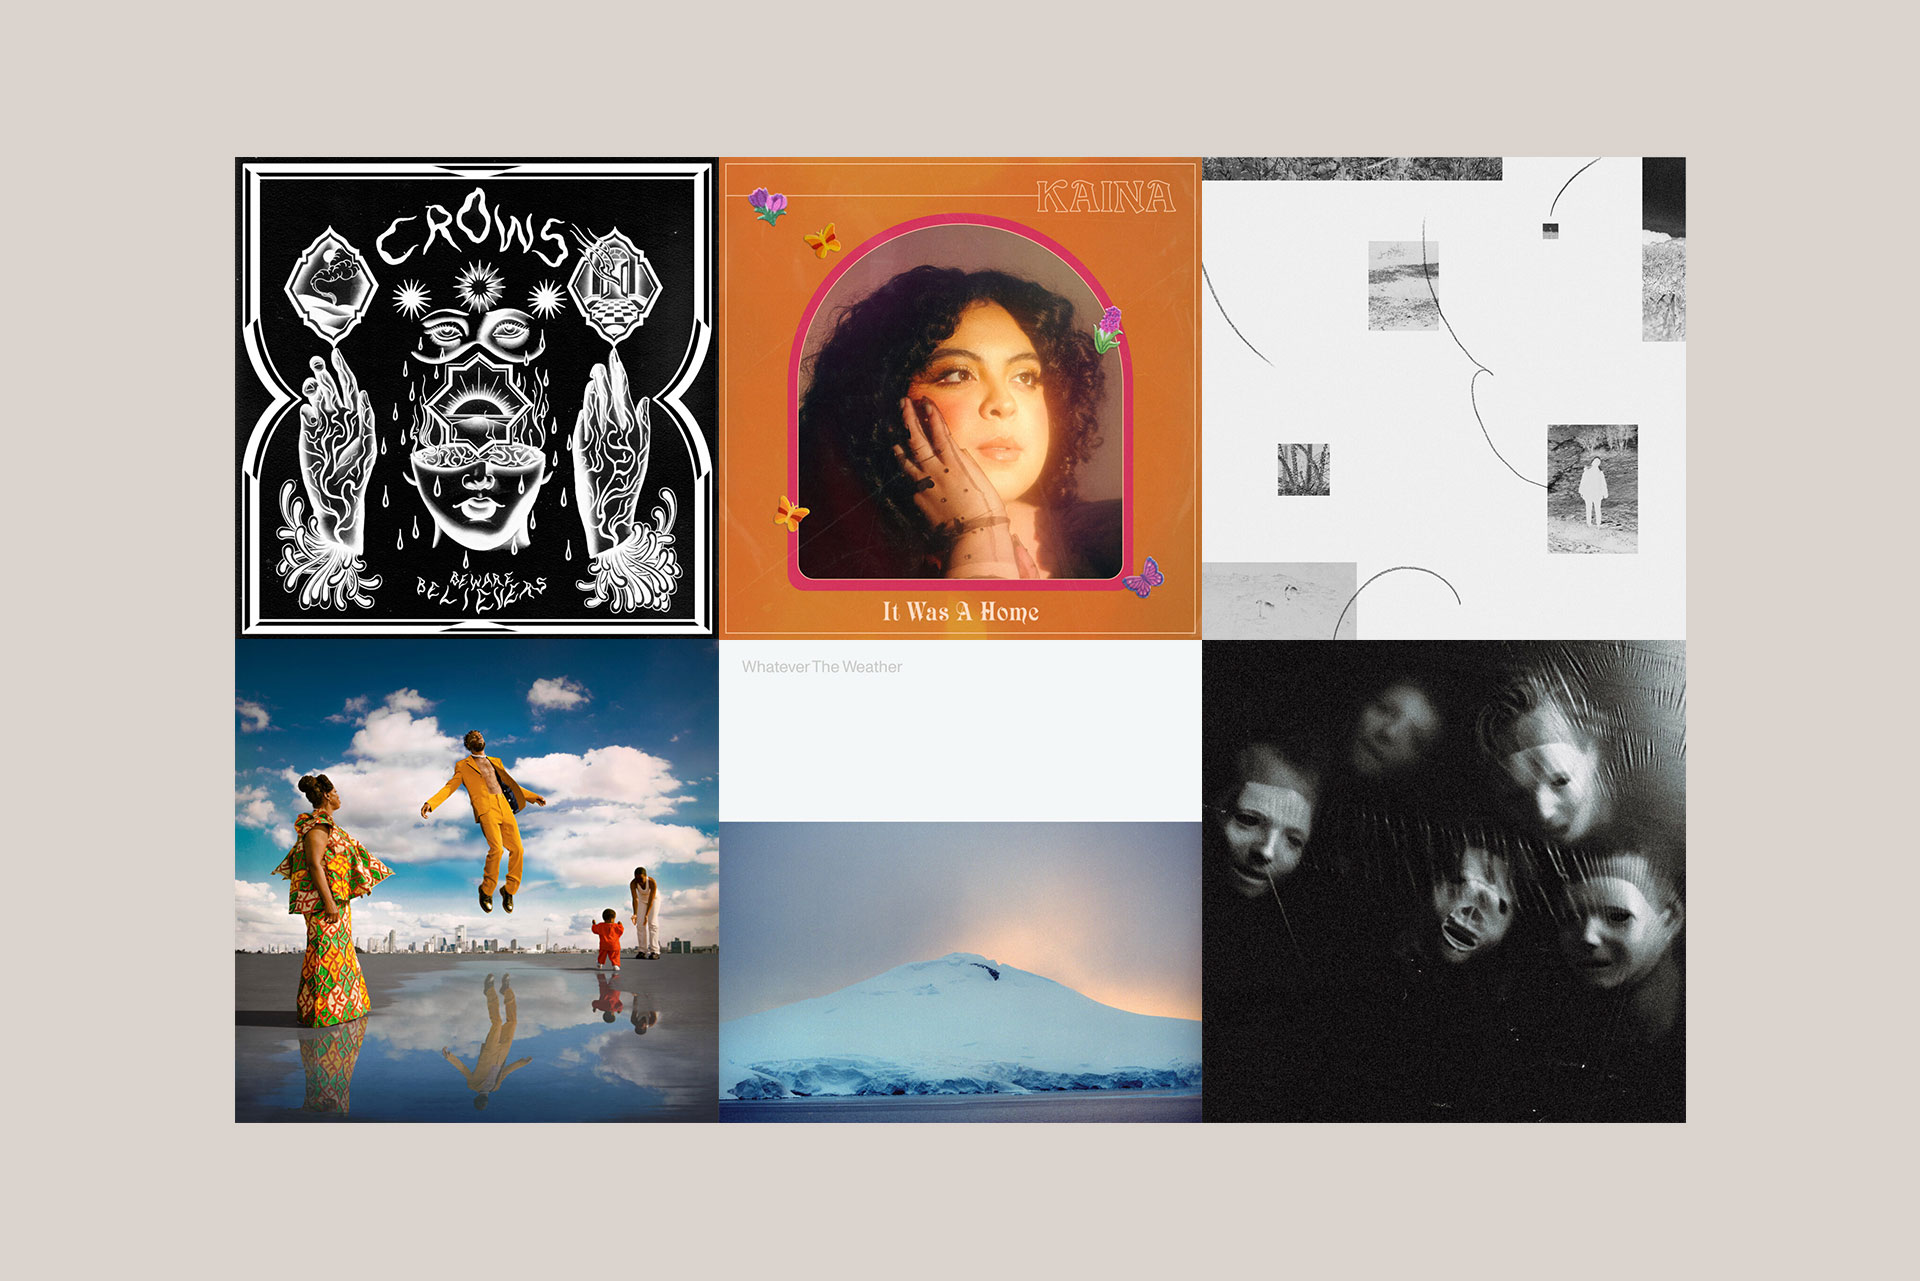 Albums of the month – March